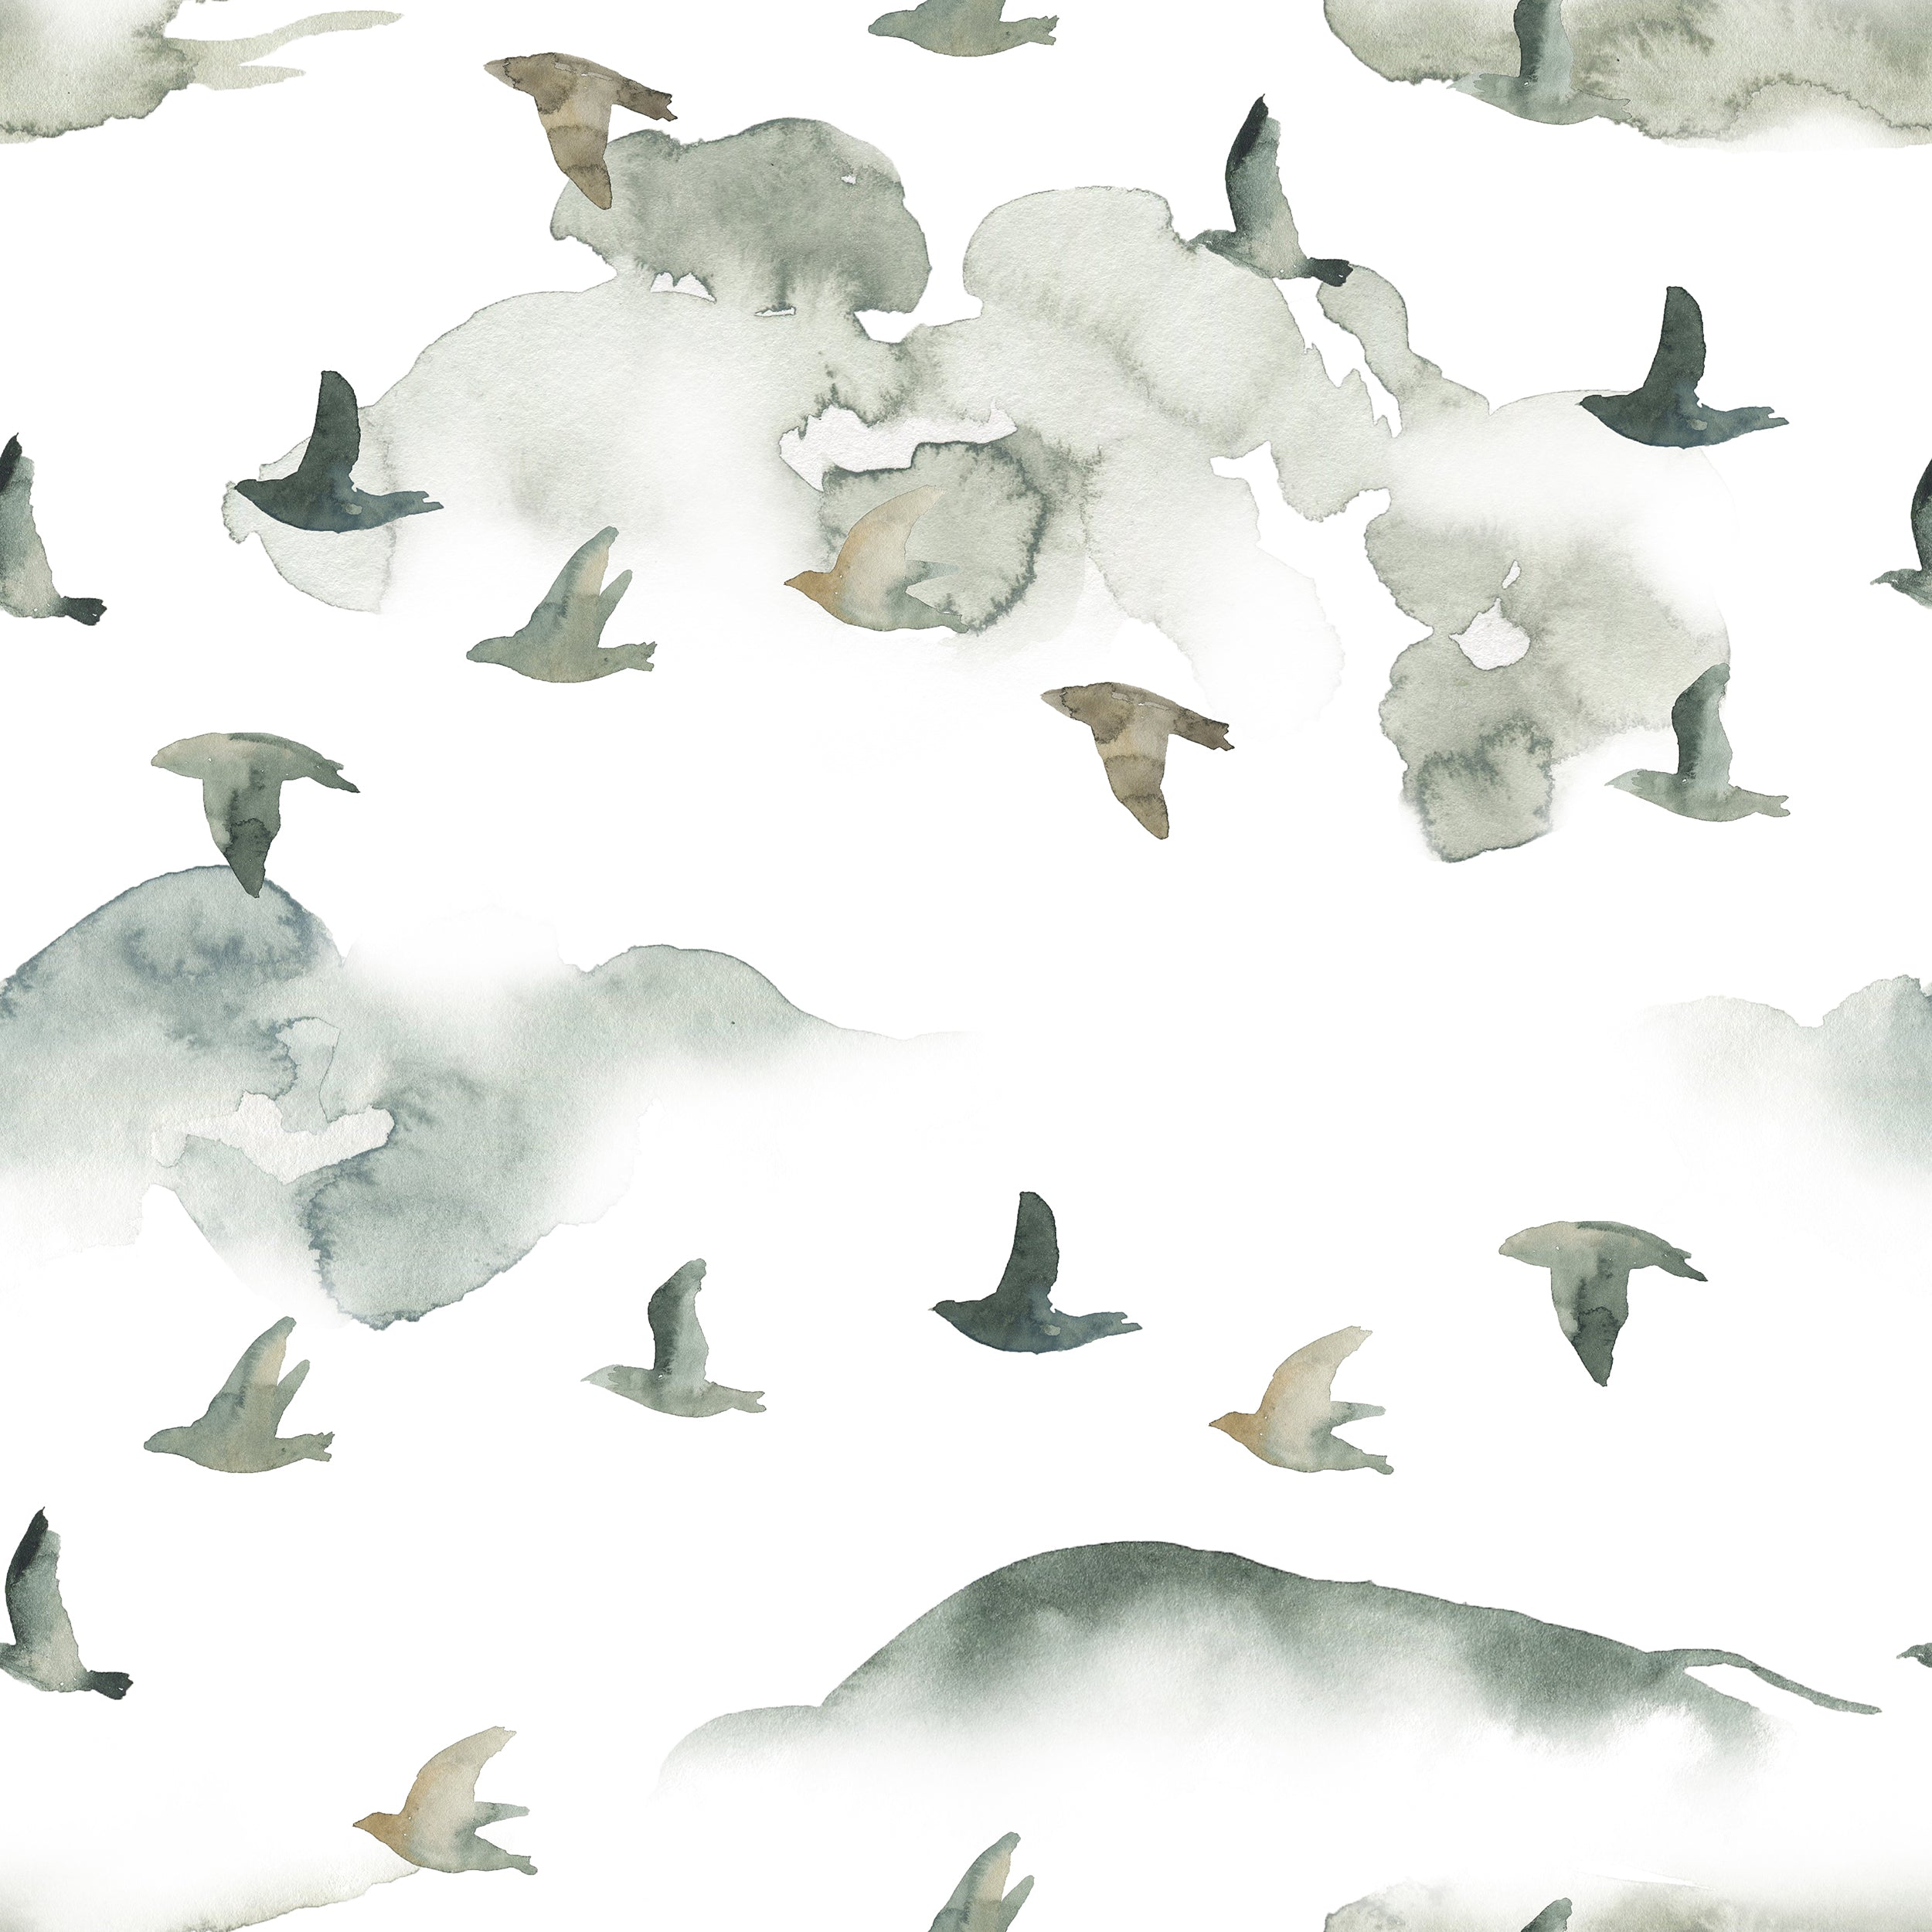 A close-up of the "Wild Pinery Wallpaper," featuring abstract watercolor pine trees and birds in flight. The shapes are rendered in a soft, earthy palette of greens and browns, with a wash-like effect that gives the appearance of a misty forest landscape, lending a peaceful and naturalistic feel to the wall covering.